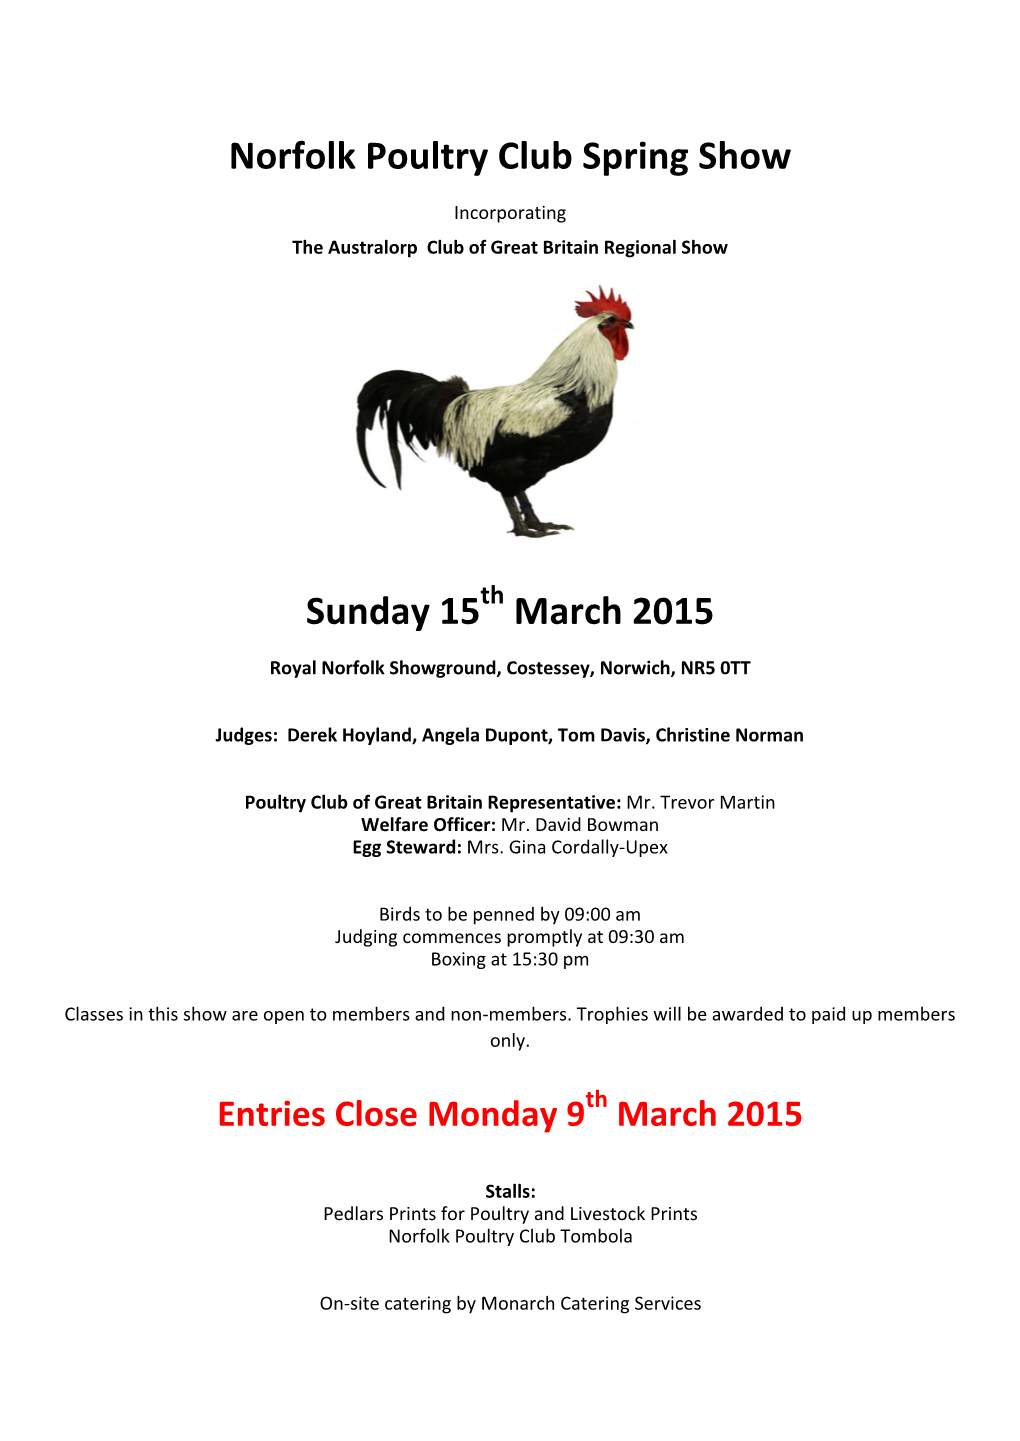 Sunday 15 March 2015 Norfolk Poultry Club Spring Show